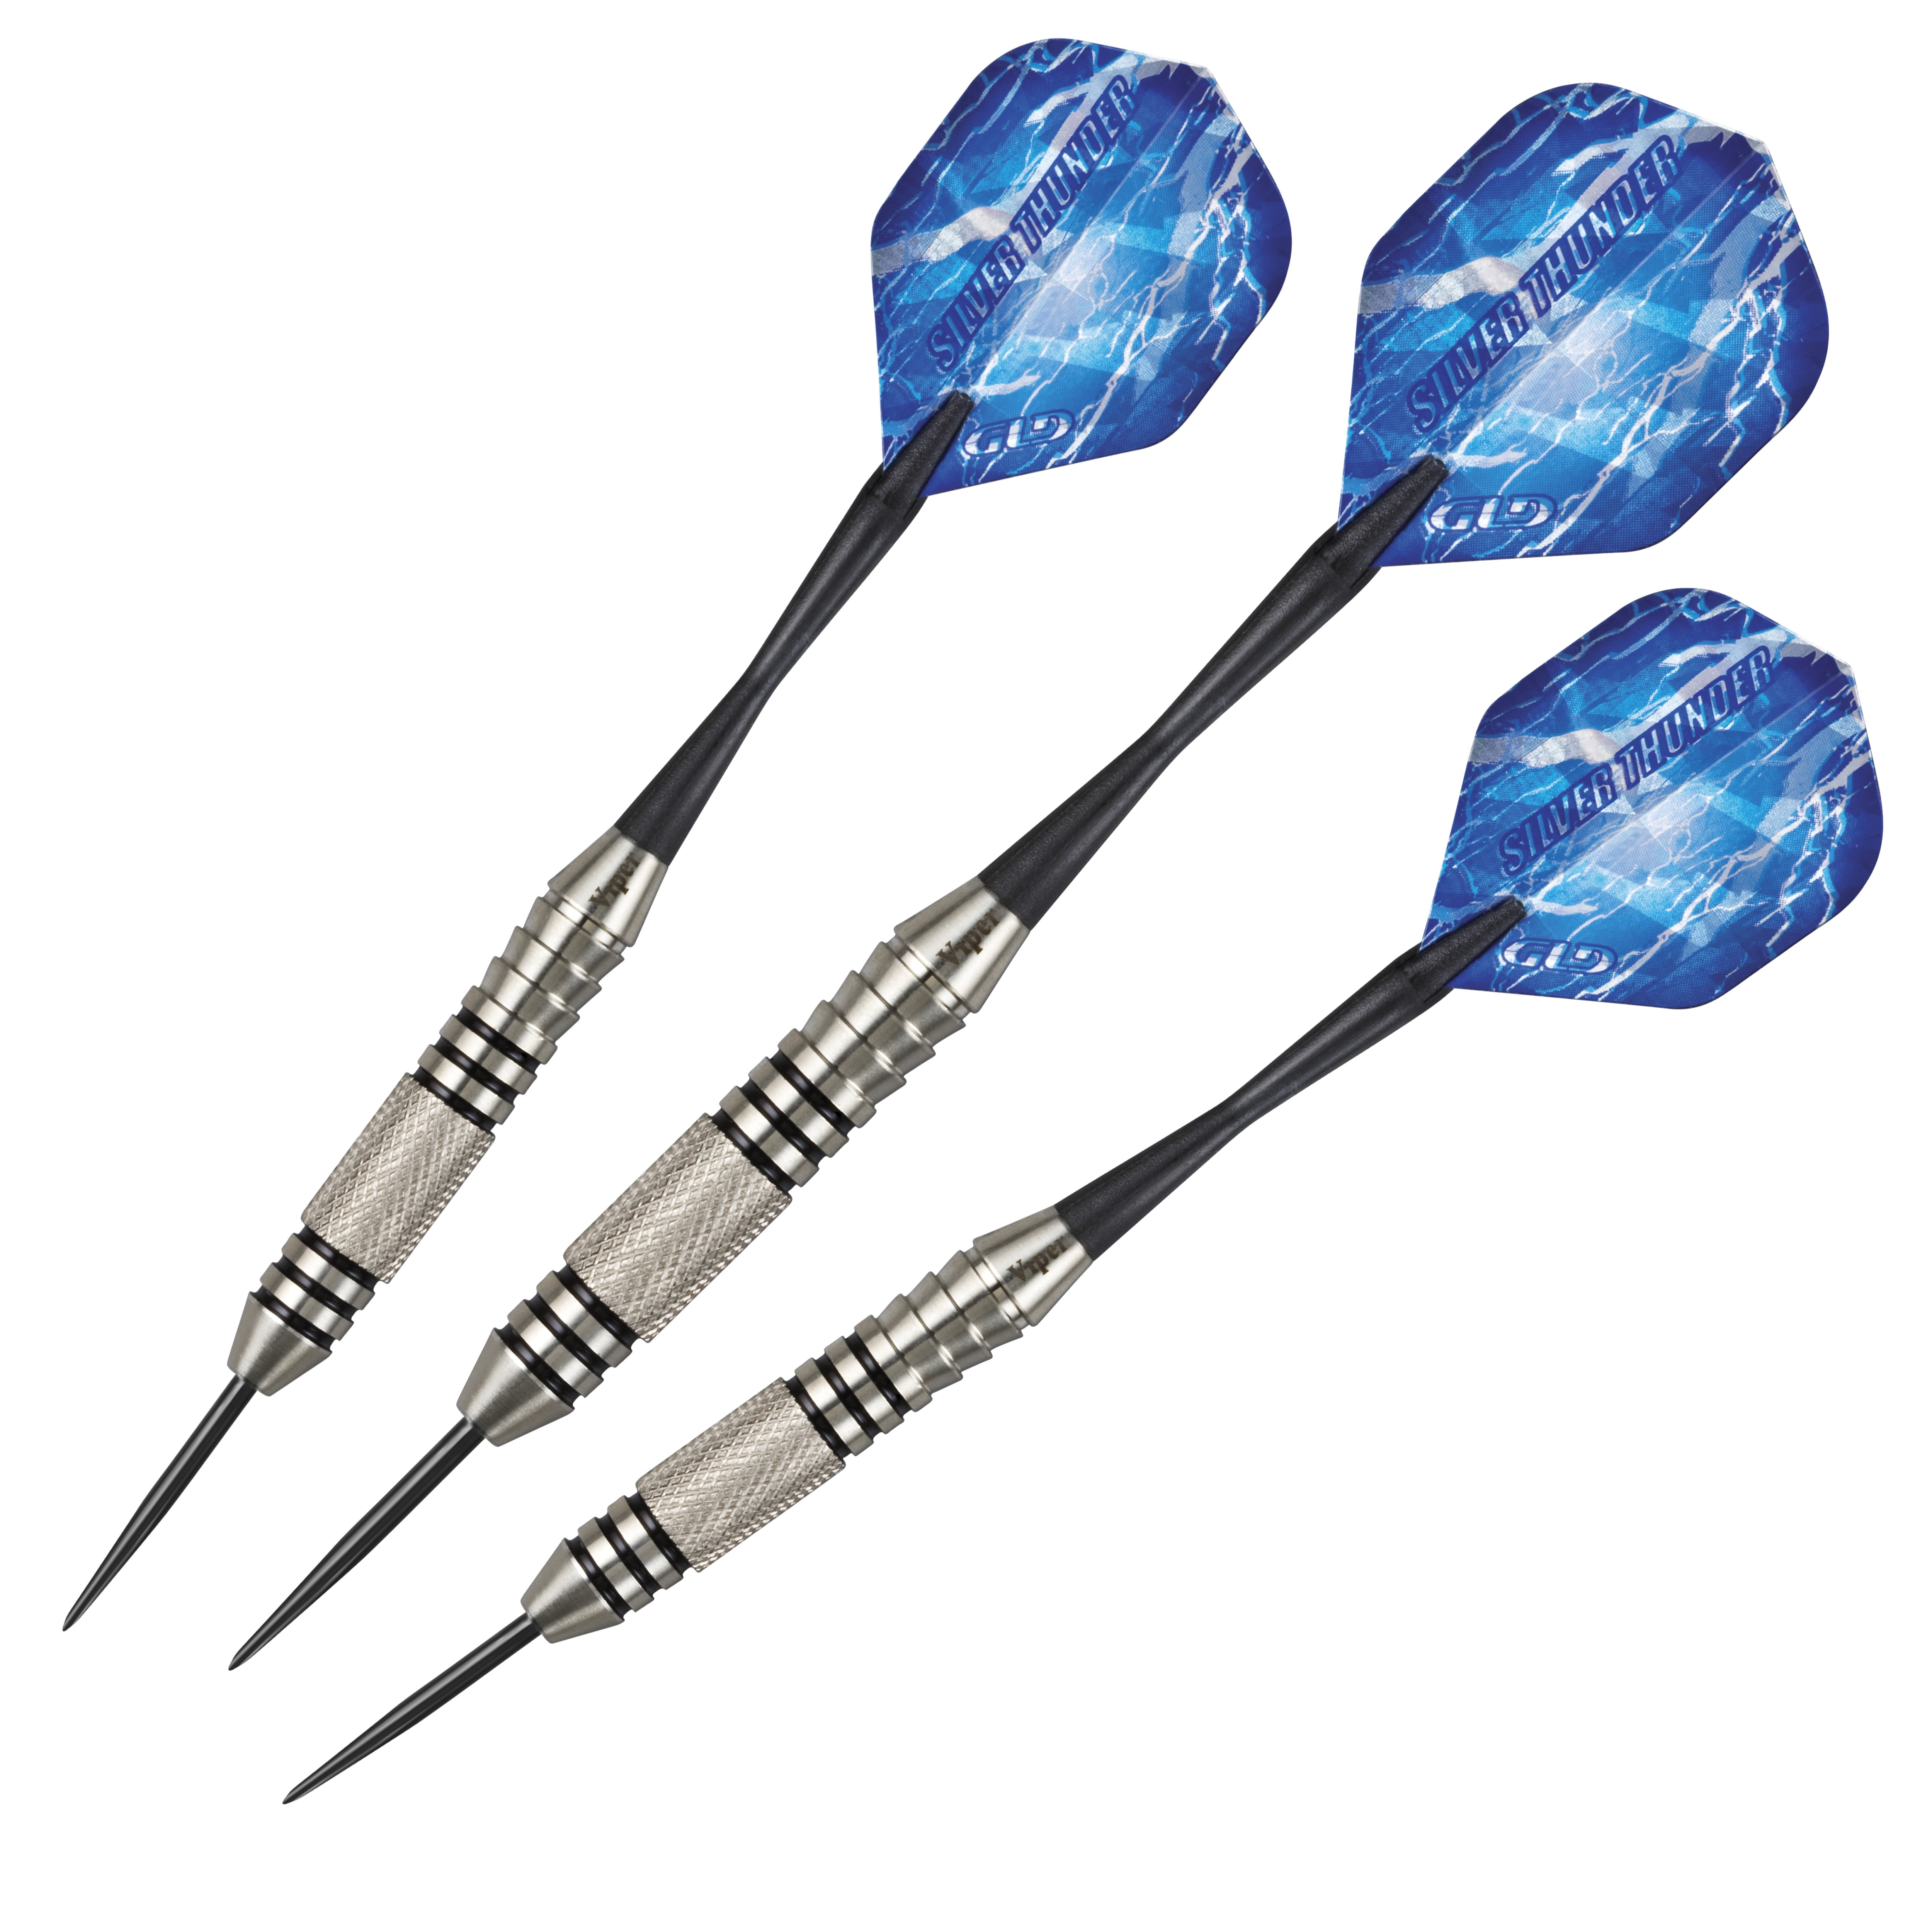 Viper Laser Throw Toe Line Marker Steel and Soft Tip Darts ? FAST & FREE 